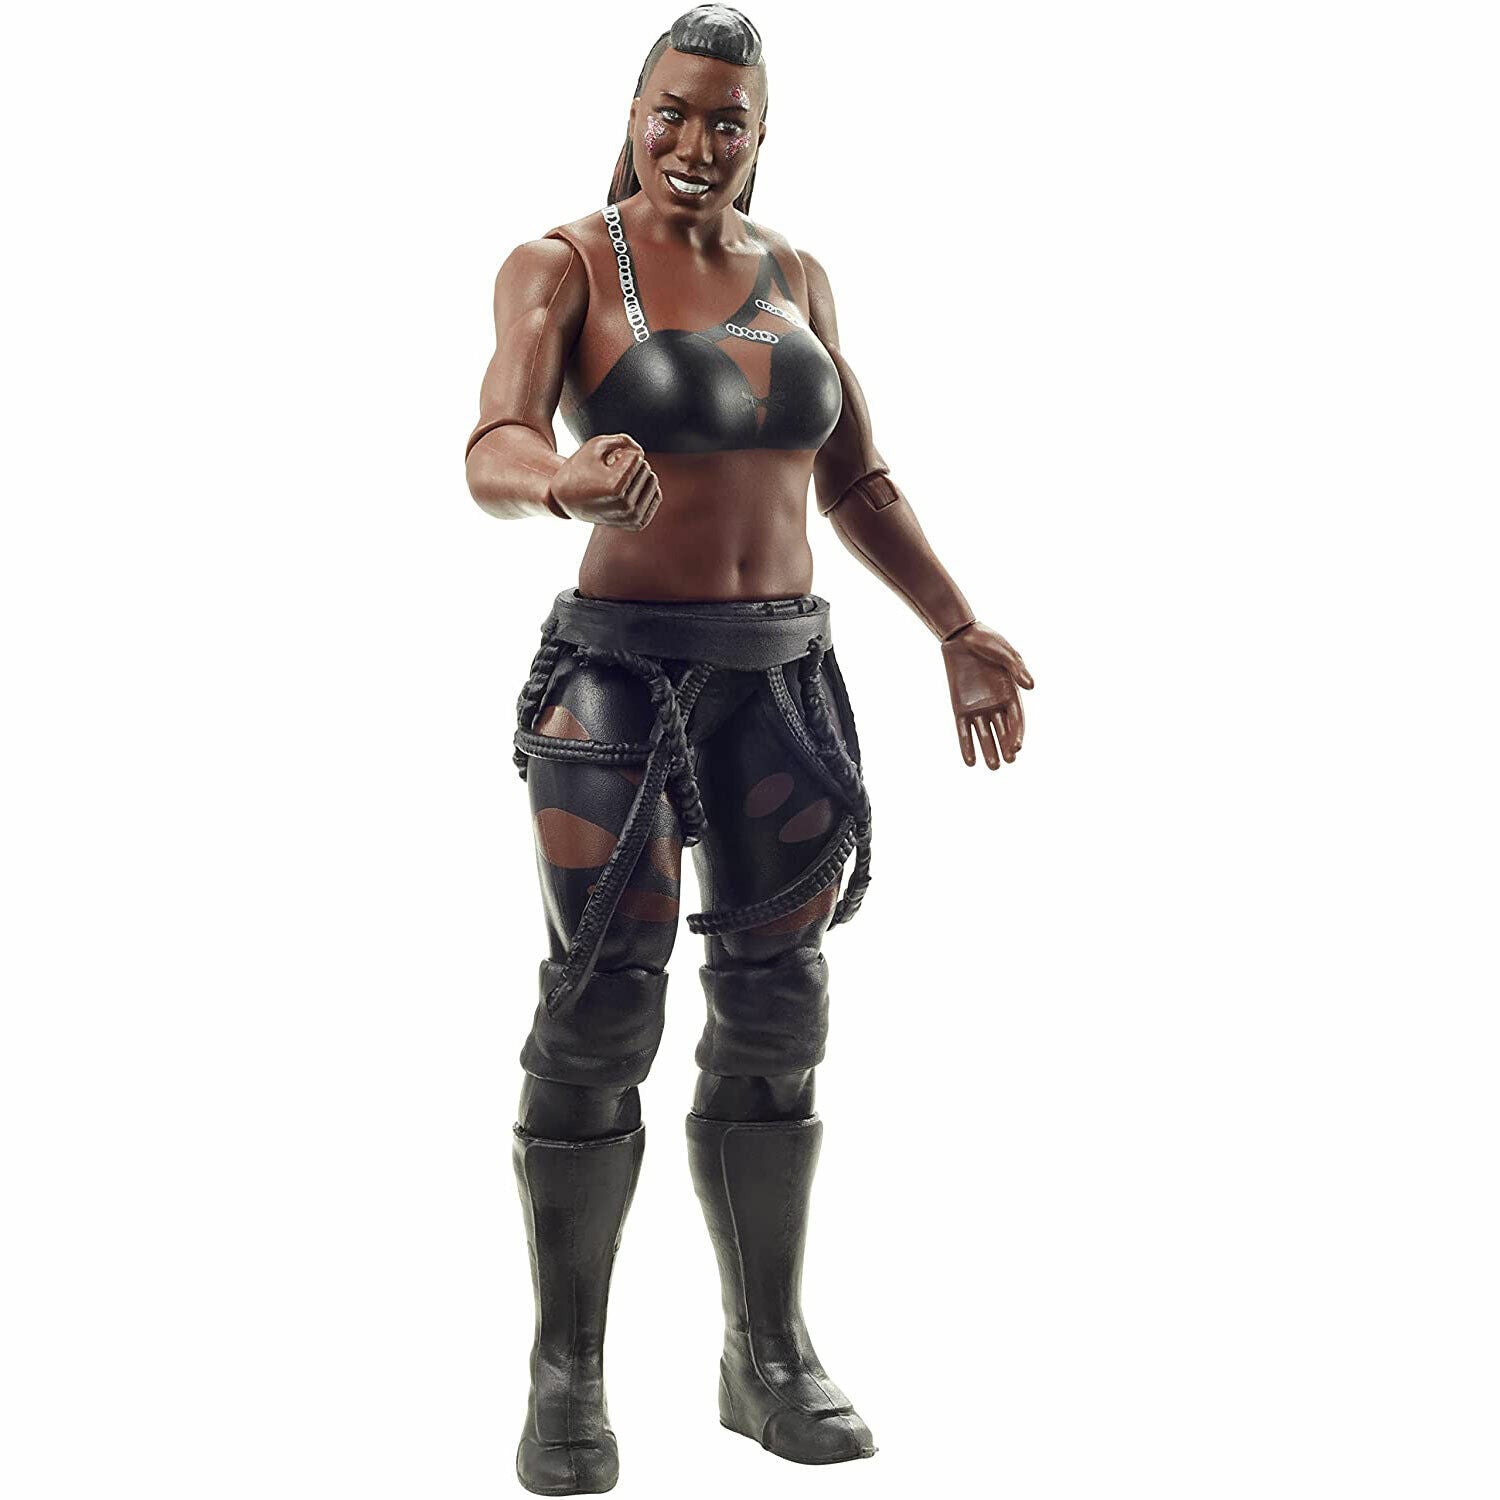 New WWE Basic Action Figure Series 125 Ember Moon